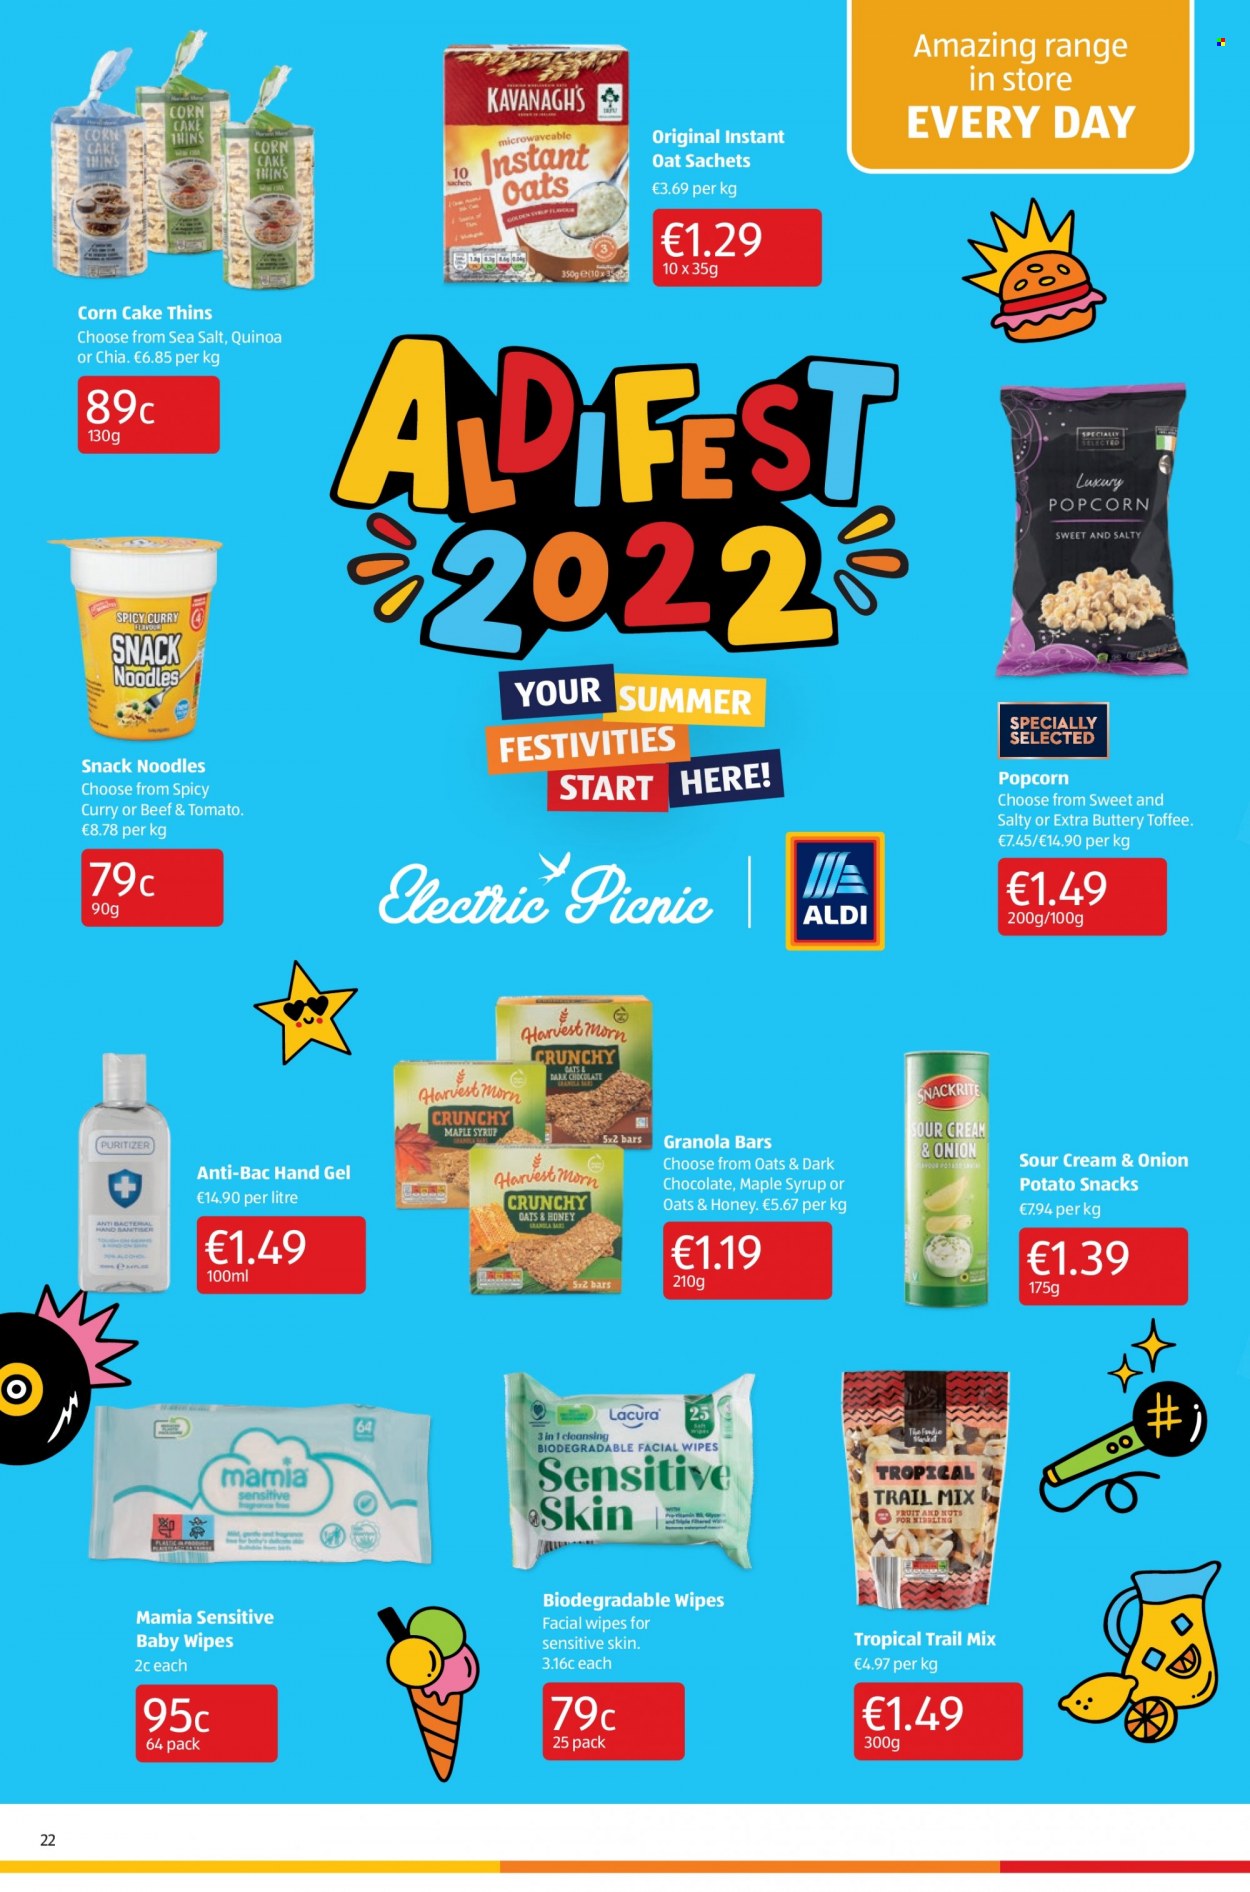 thumbnail - Aldi offer  - 02.06.2022 - 08.06.2022 - Sales products - cake, Corn Thins, corn, noodles, chocolate, snack, toffee, dark chocolate, Thins, popcorn, flour, sea salt, granola bar, quinoa, maple syrup, honey, syrup, trail mix, wipes, baby wipes, hand gel, fragrance. Page 22.